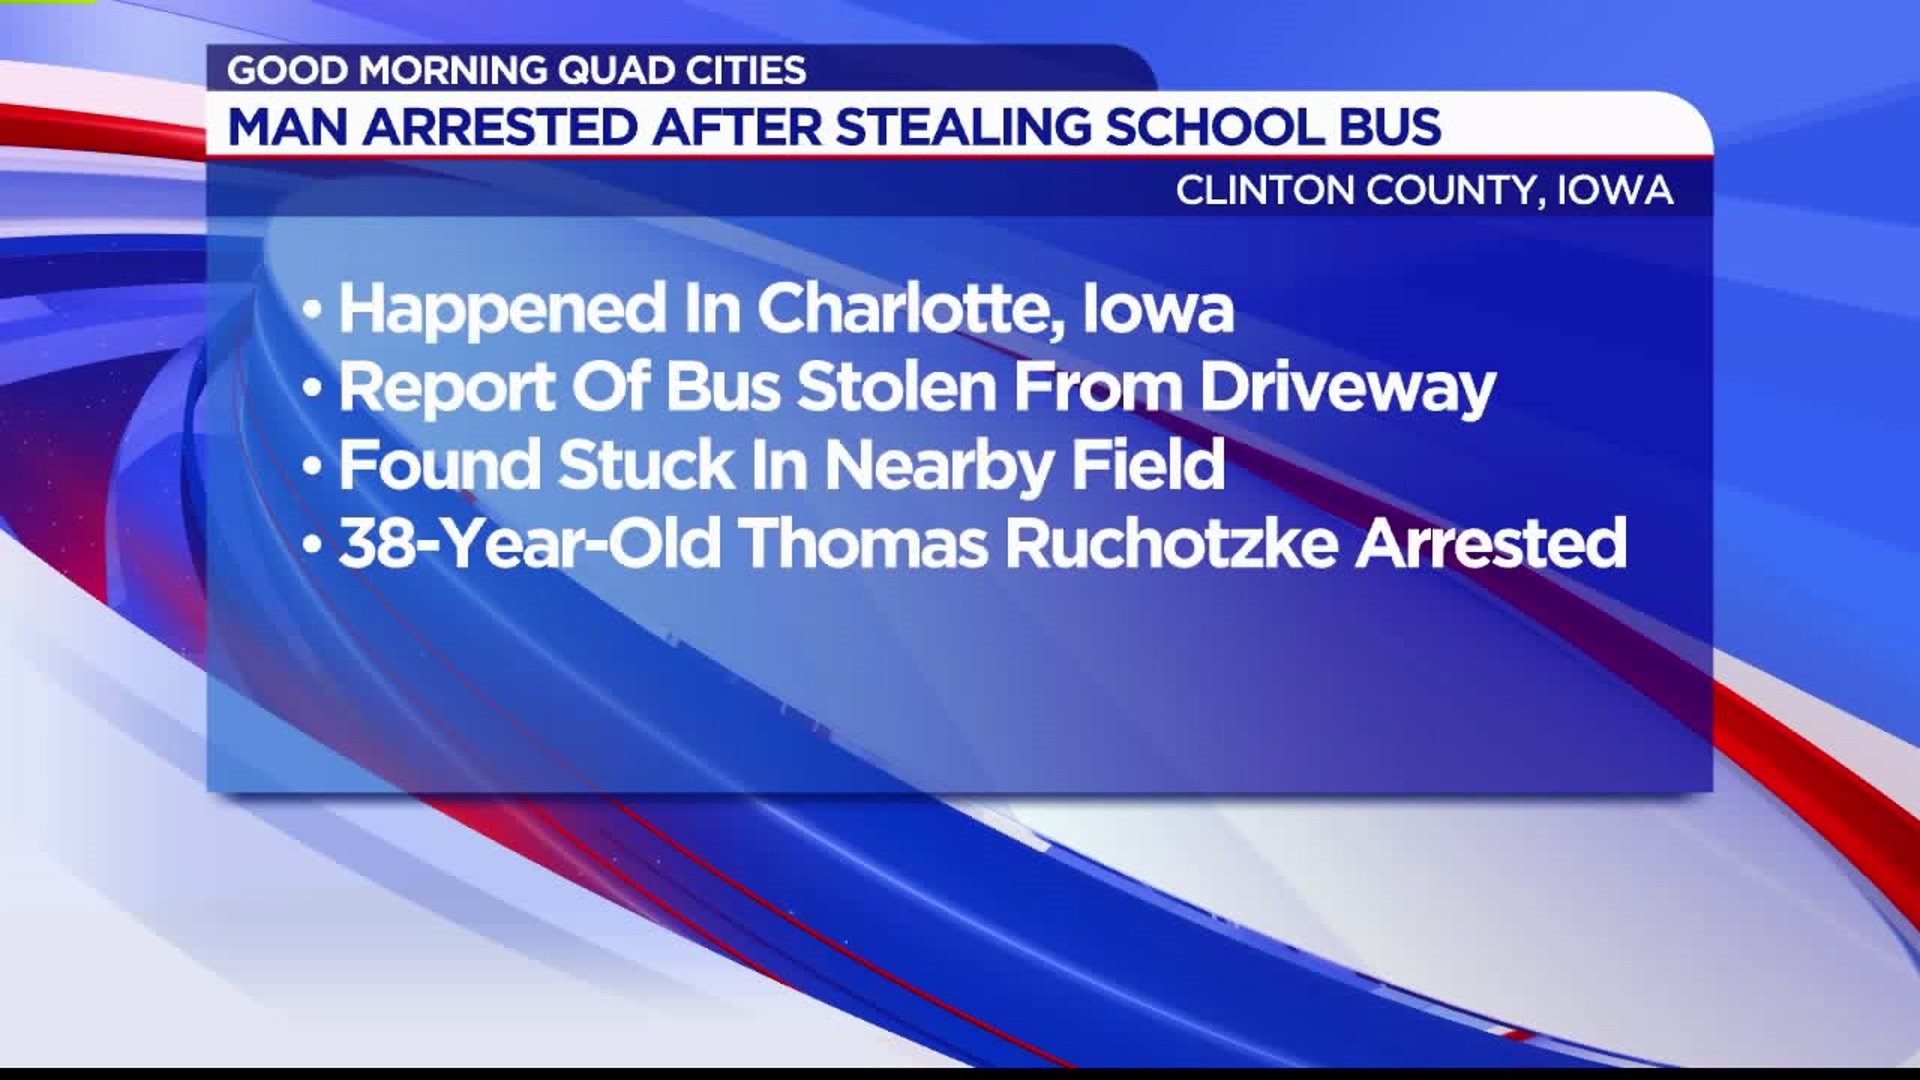 Man Arrested After Stealing School Bus